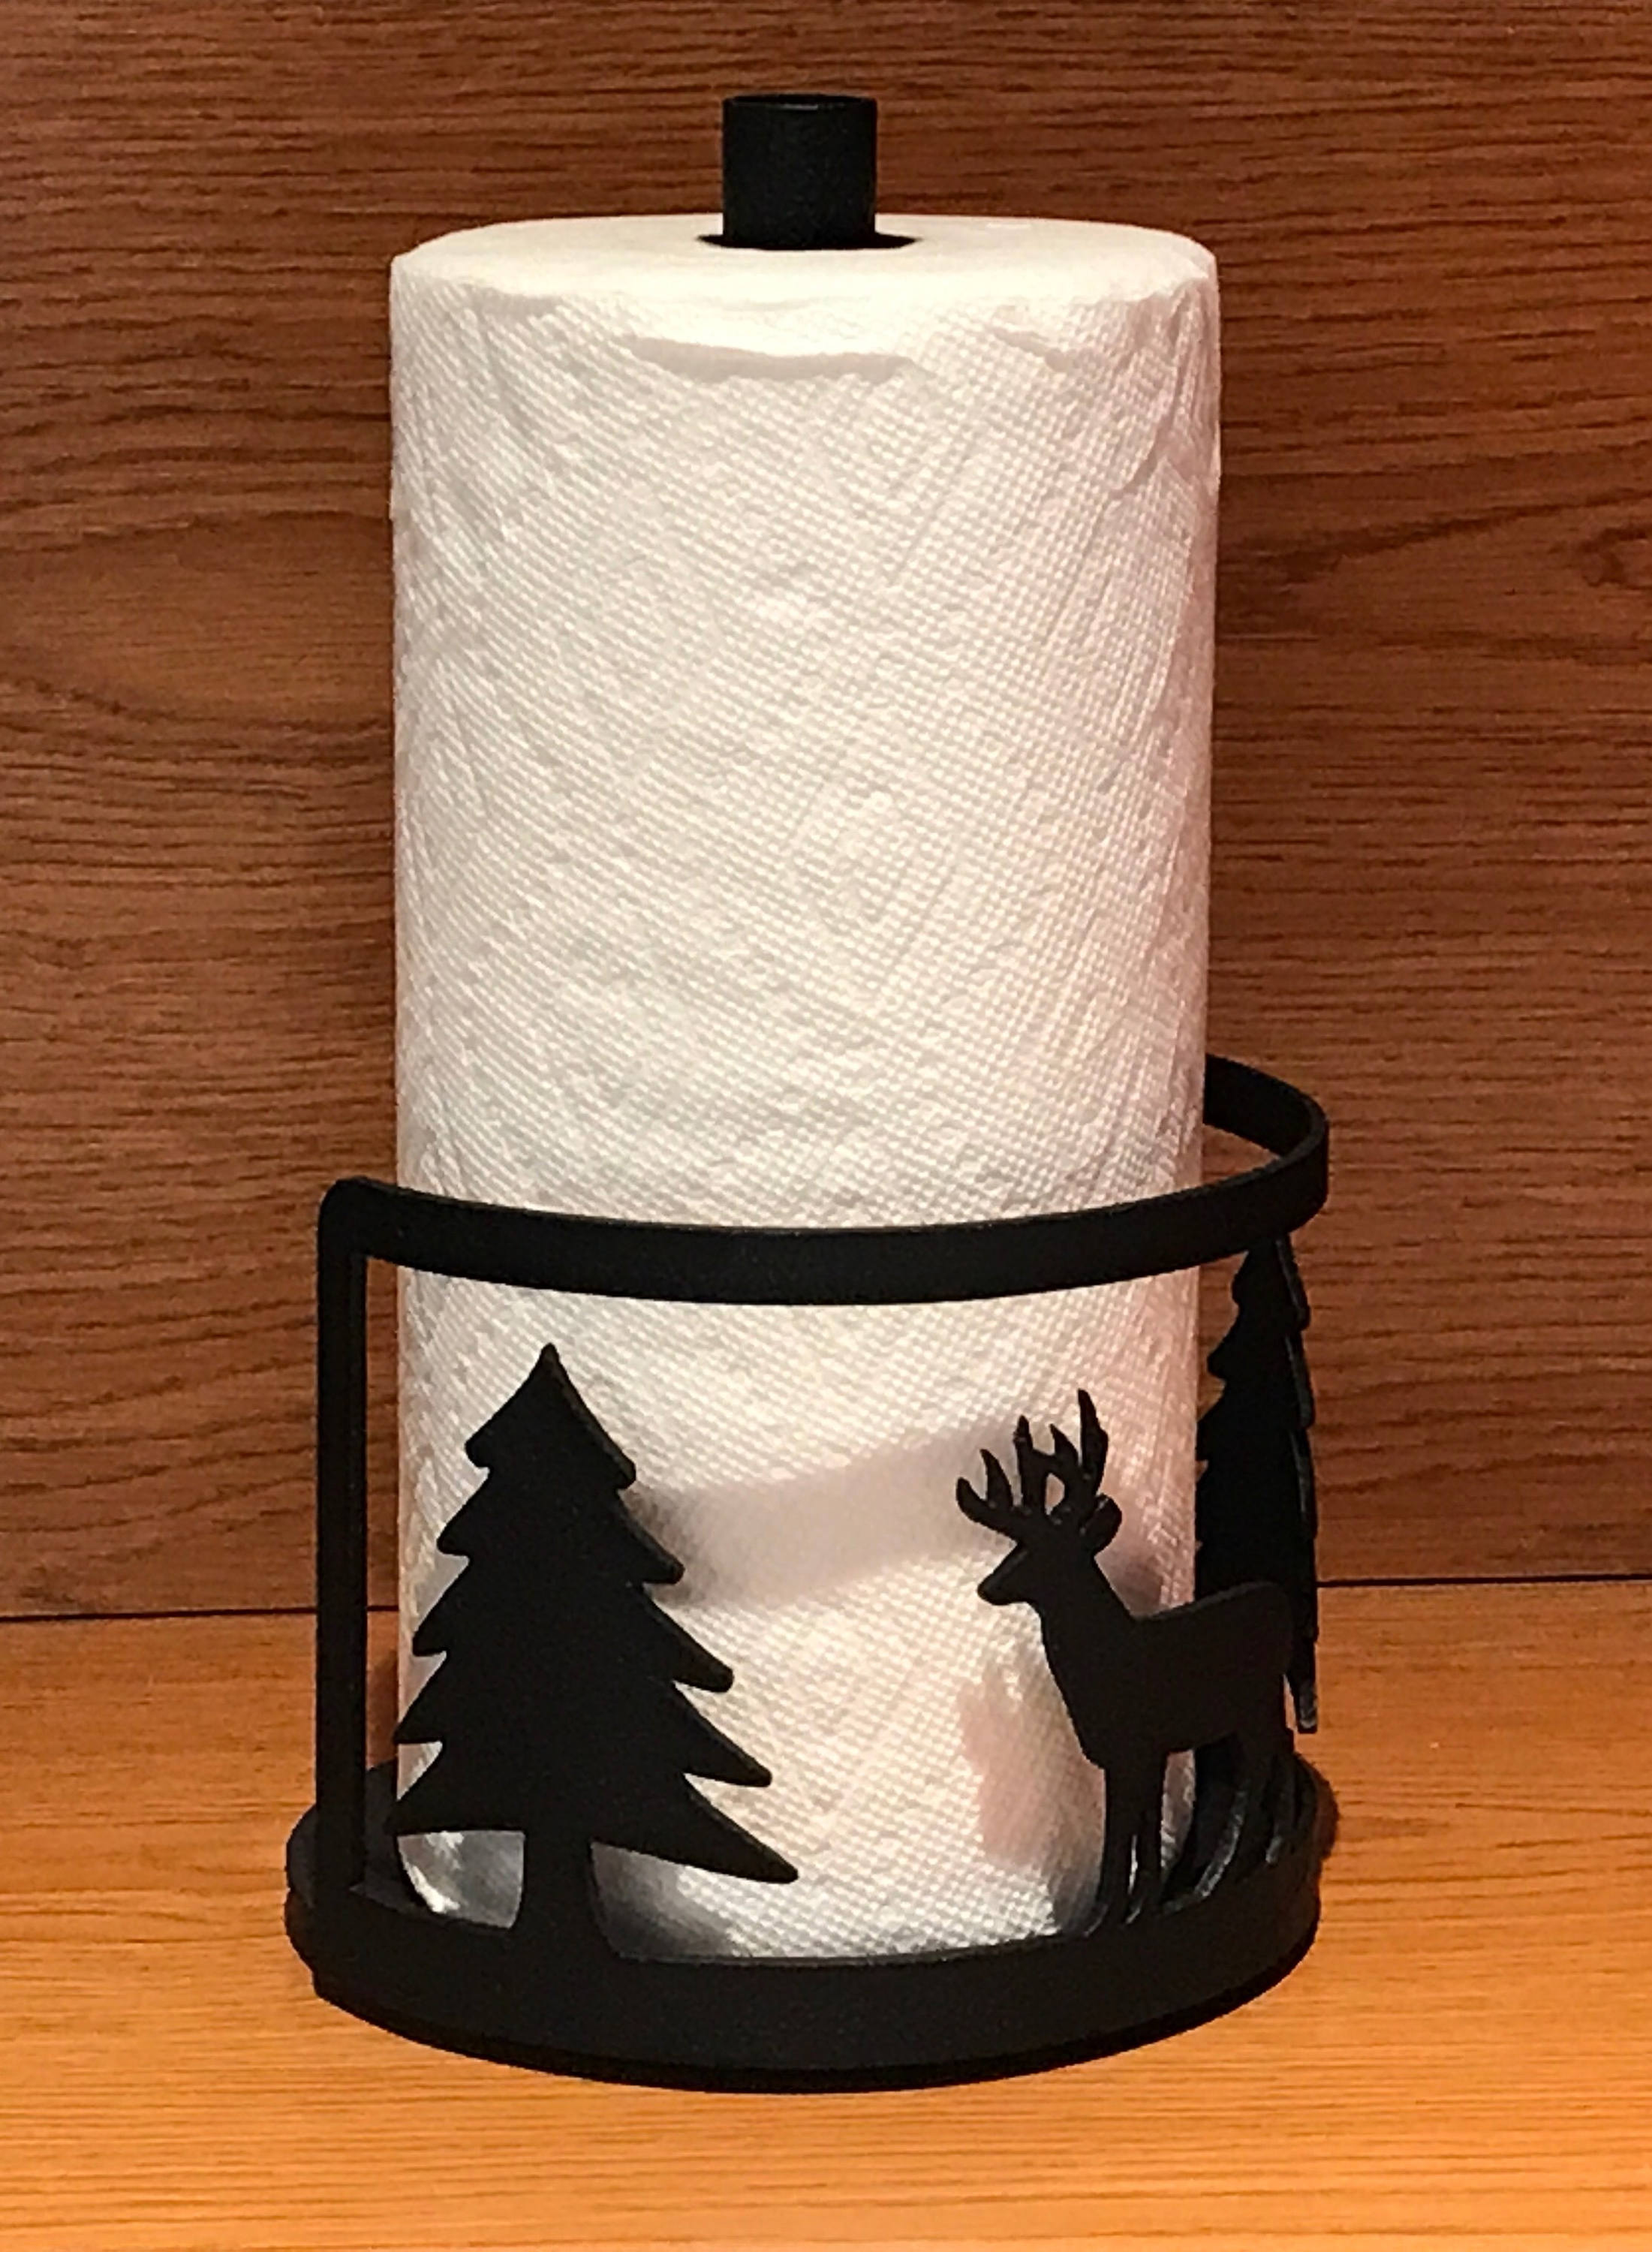 Paper Towel Holder For RV With Command Hooks And Bungee Cords